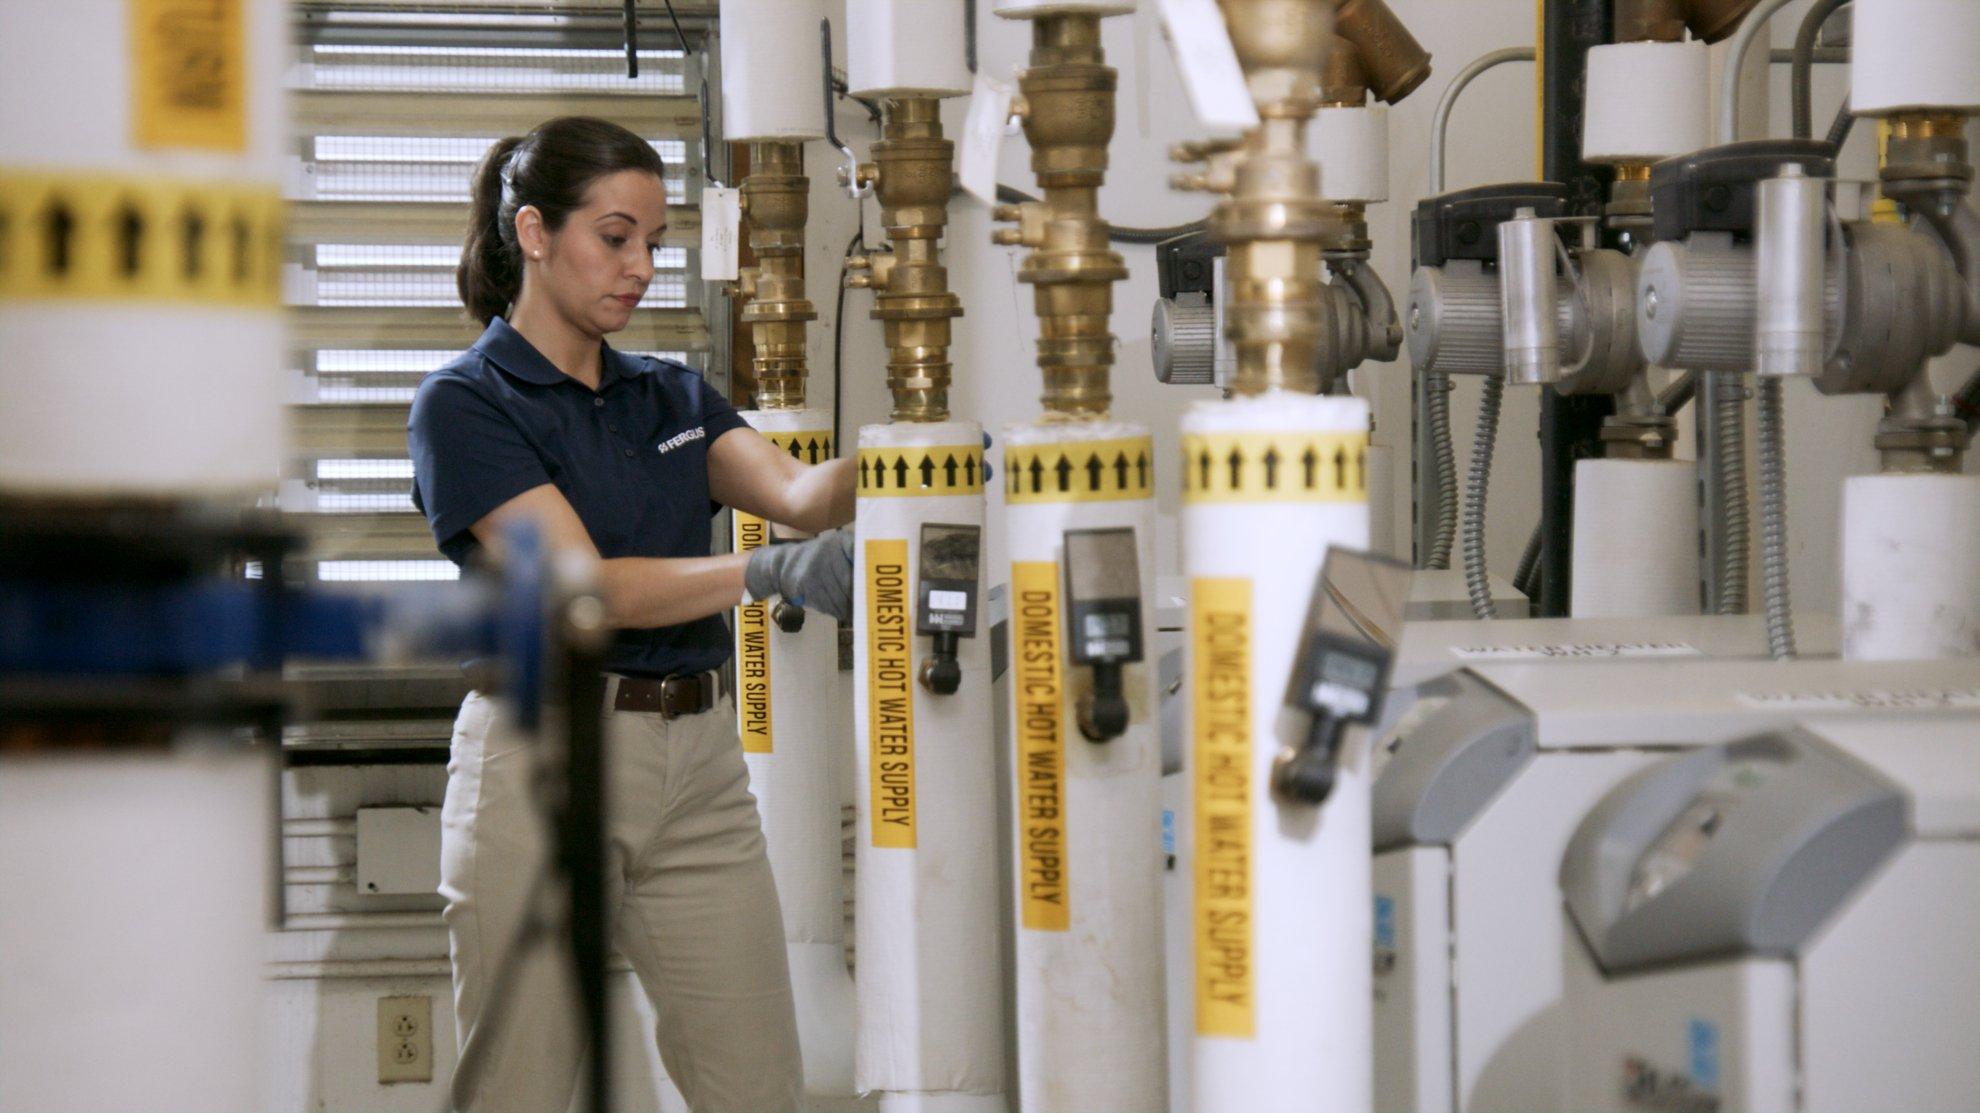 A Ferguson associate tests water pressure in a row of hot water supply systems.